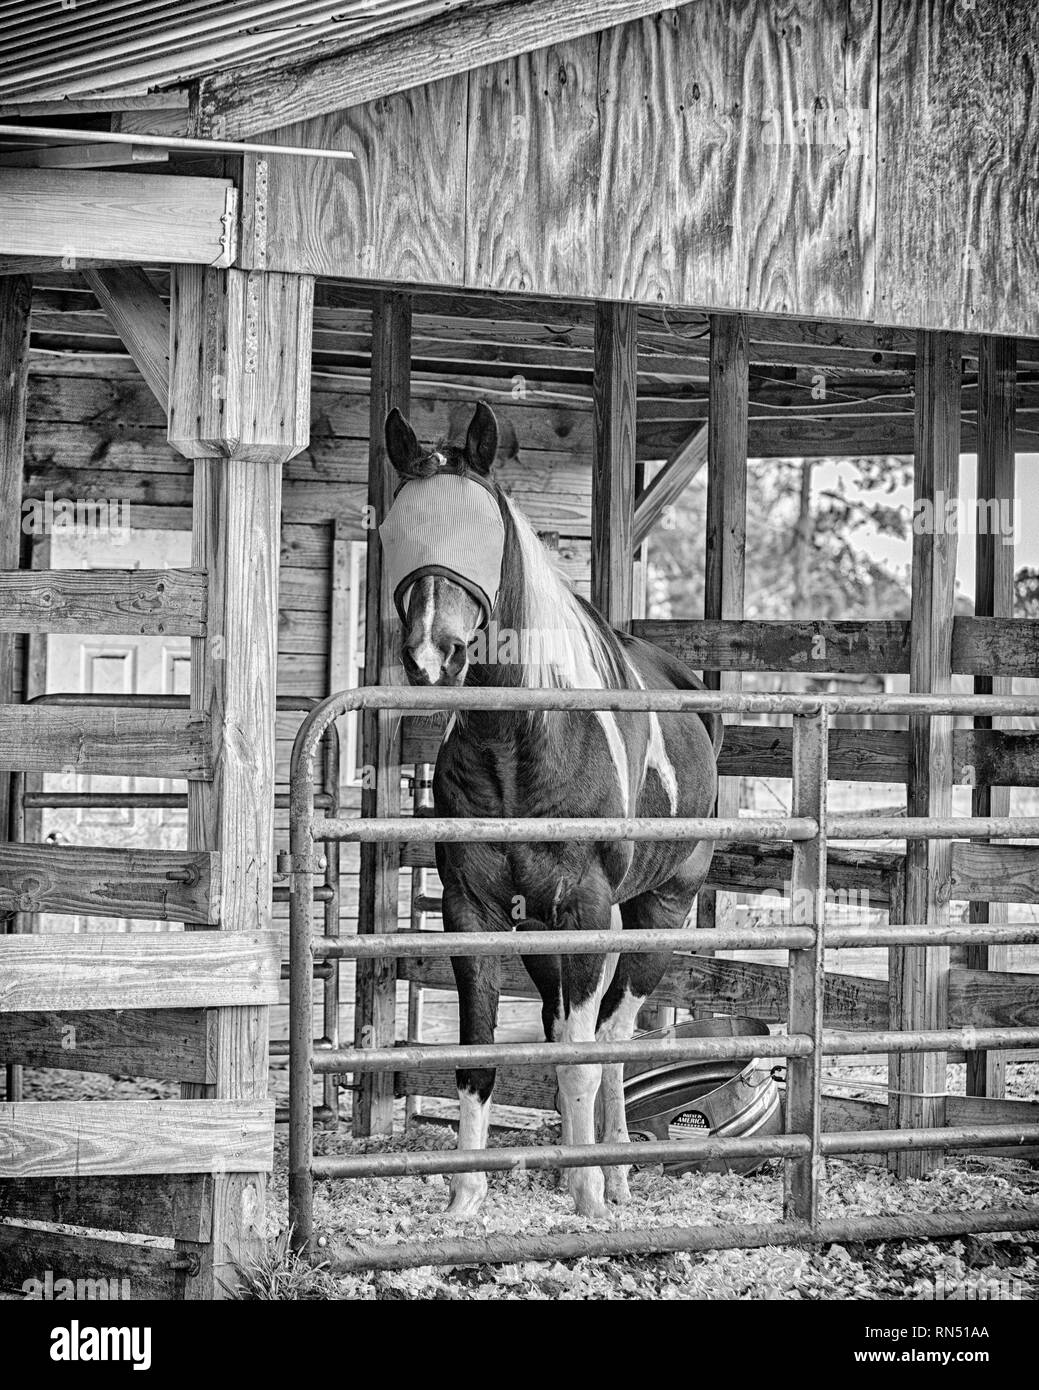 Black and white image of a paint horse in a stable looking at the camera.  He has a face mask on to protect his eyes.  He is alert, ears forward. Stock Photo